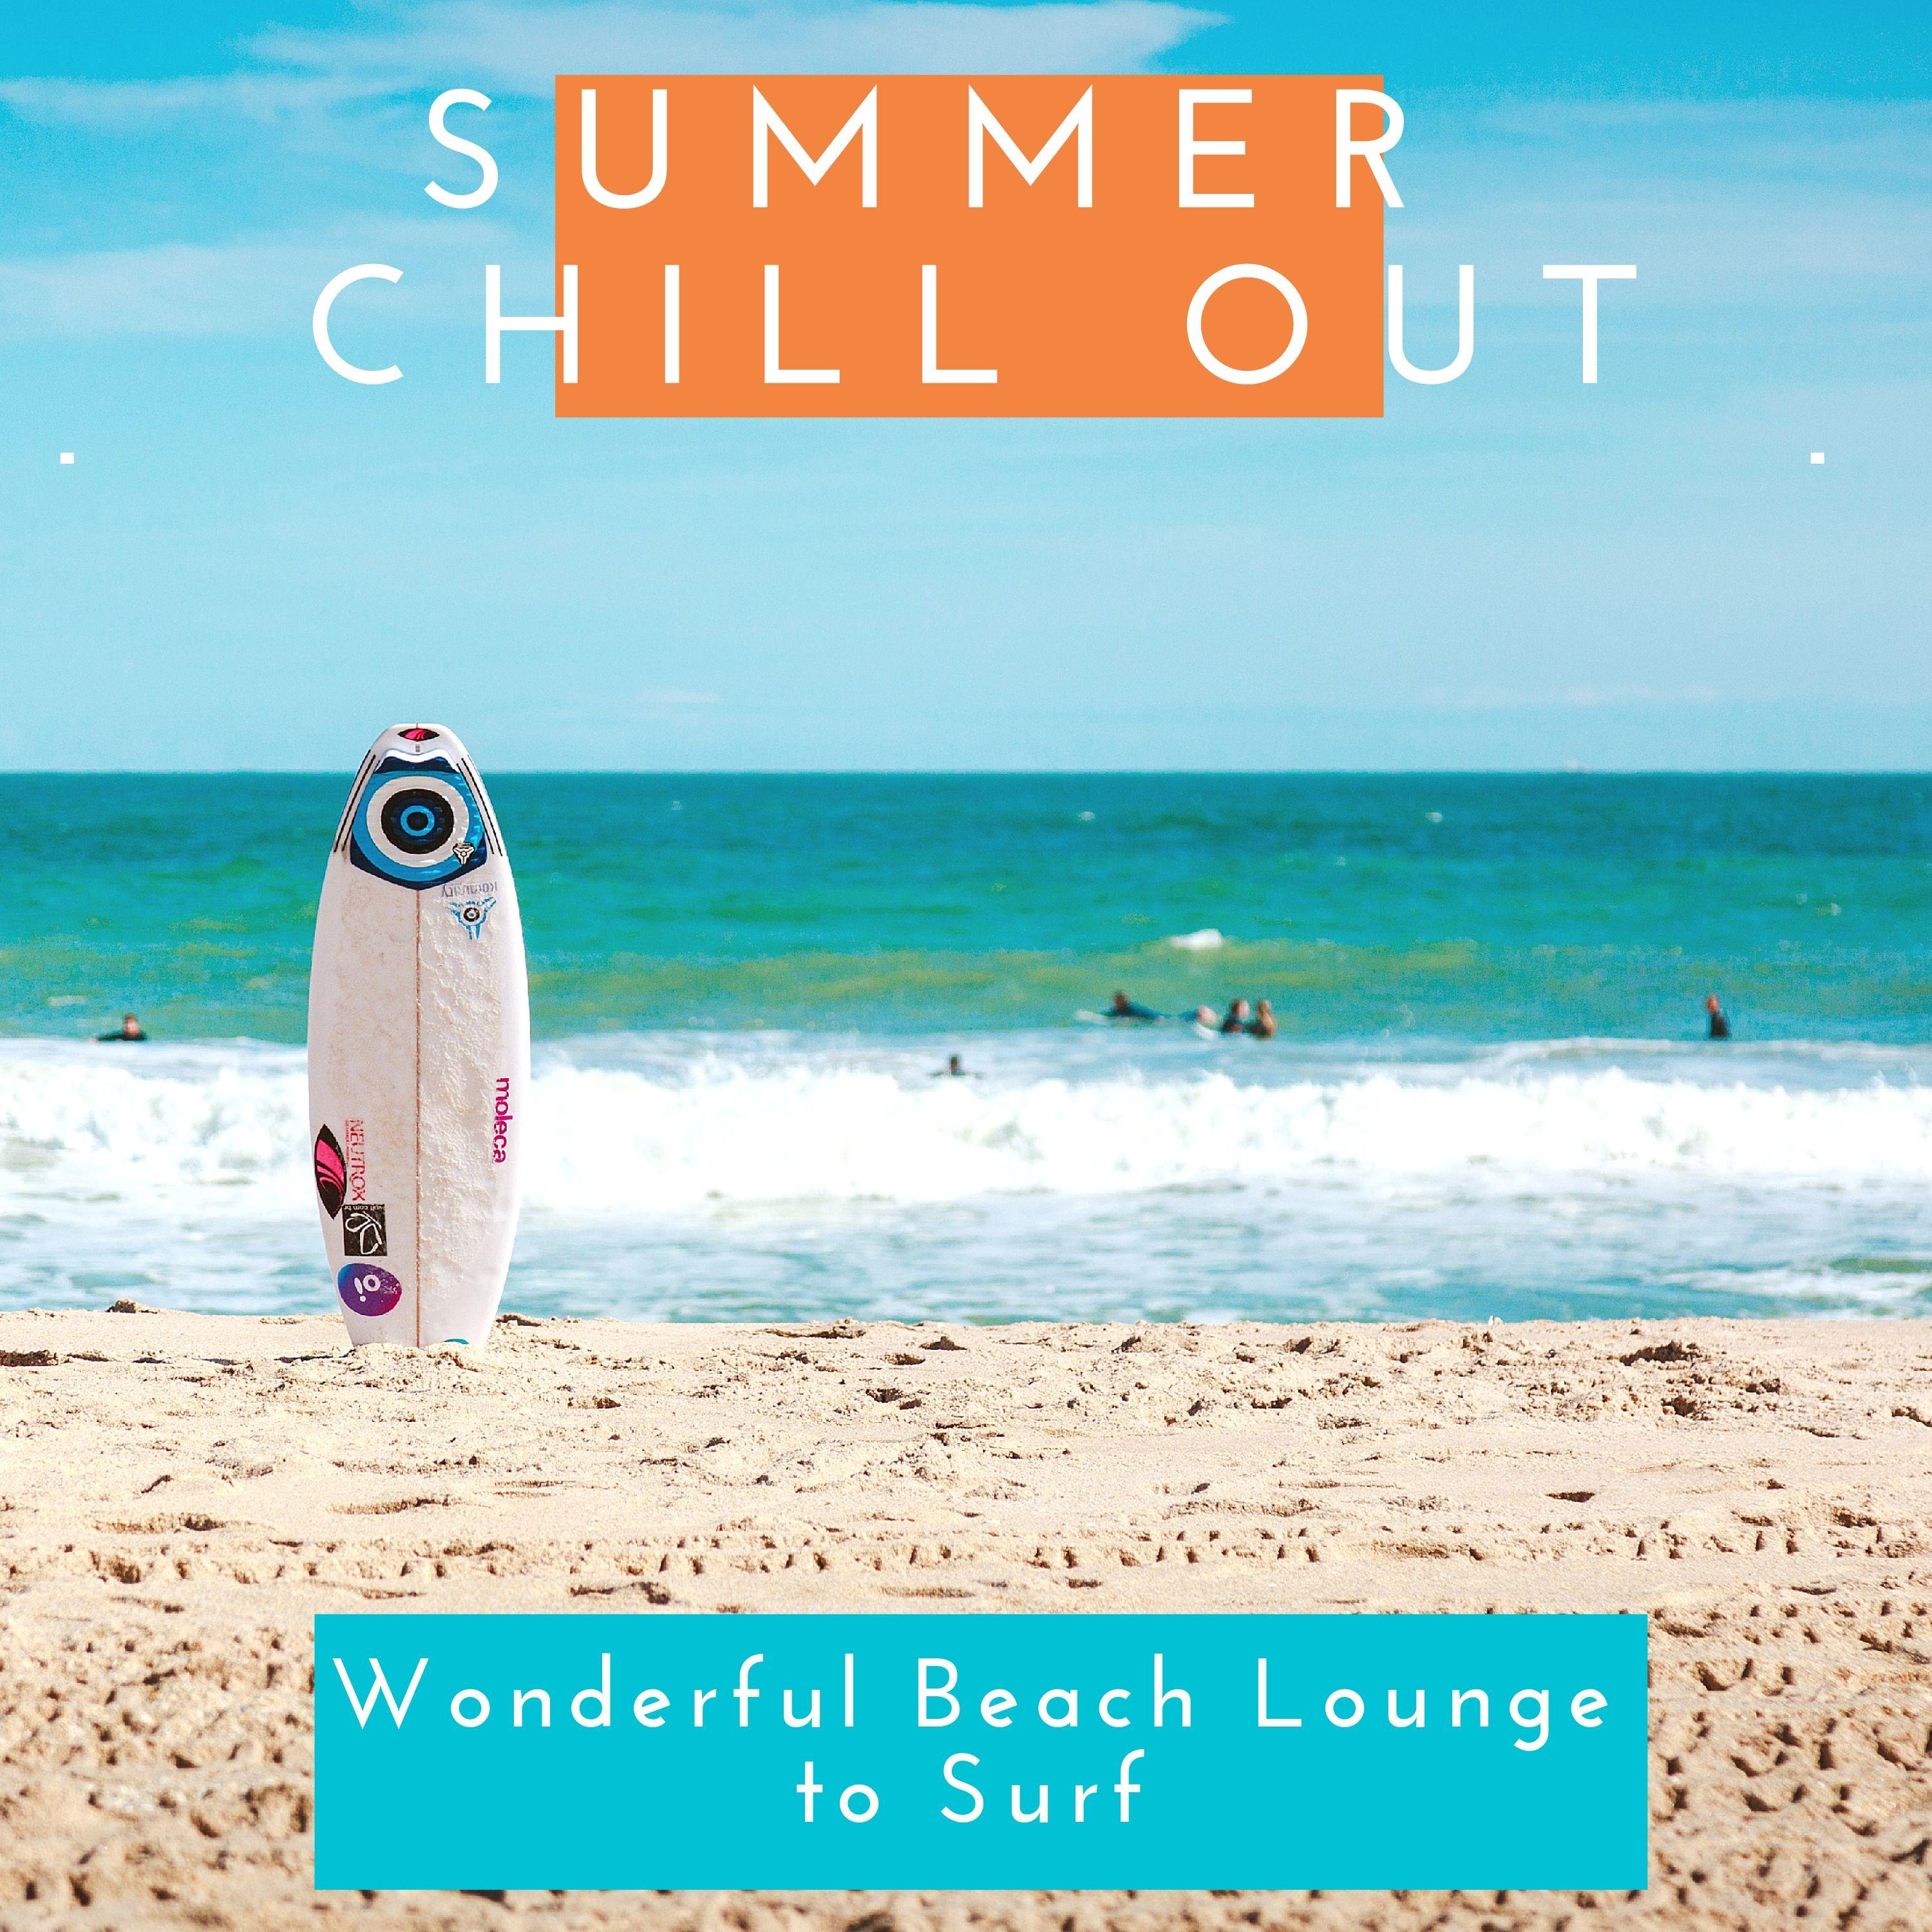 Summer Chill Out - Wonderful Beach Lounge to Surf